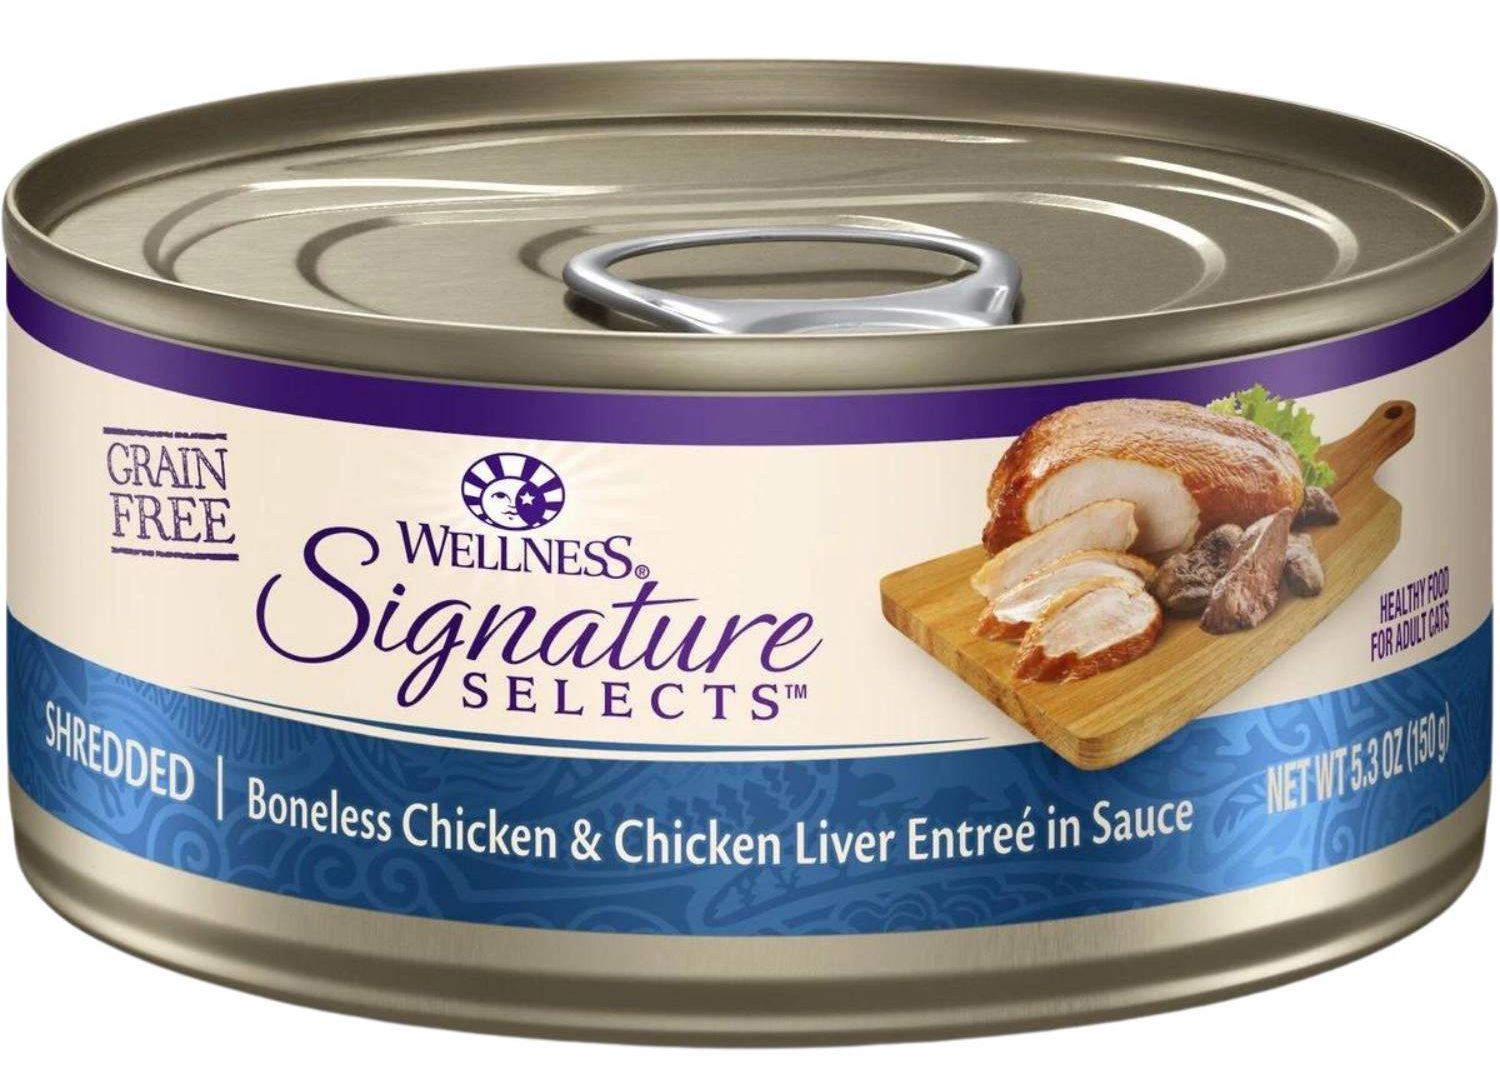 Wellness CORE Signature Selects Shredded Boneless Chicken & Chicken Liver Entree in Sauce Grain-Free Natural Canned Cat Food